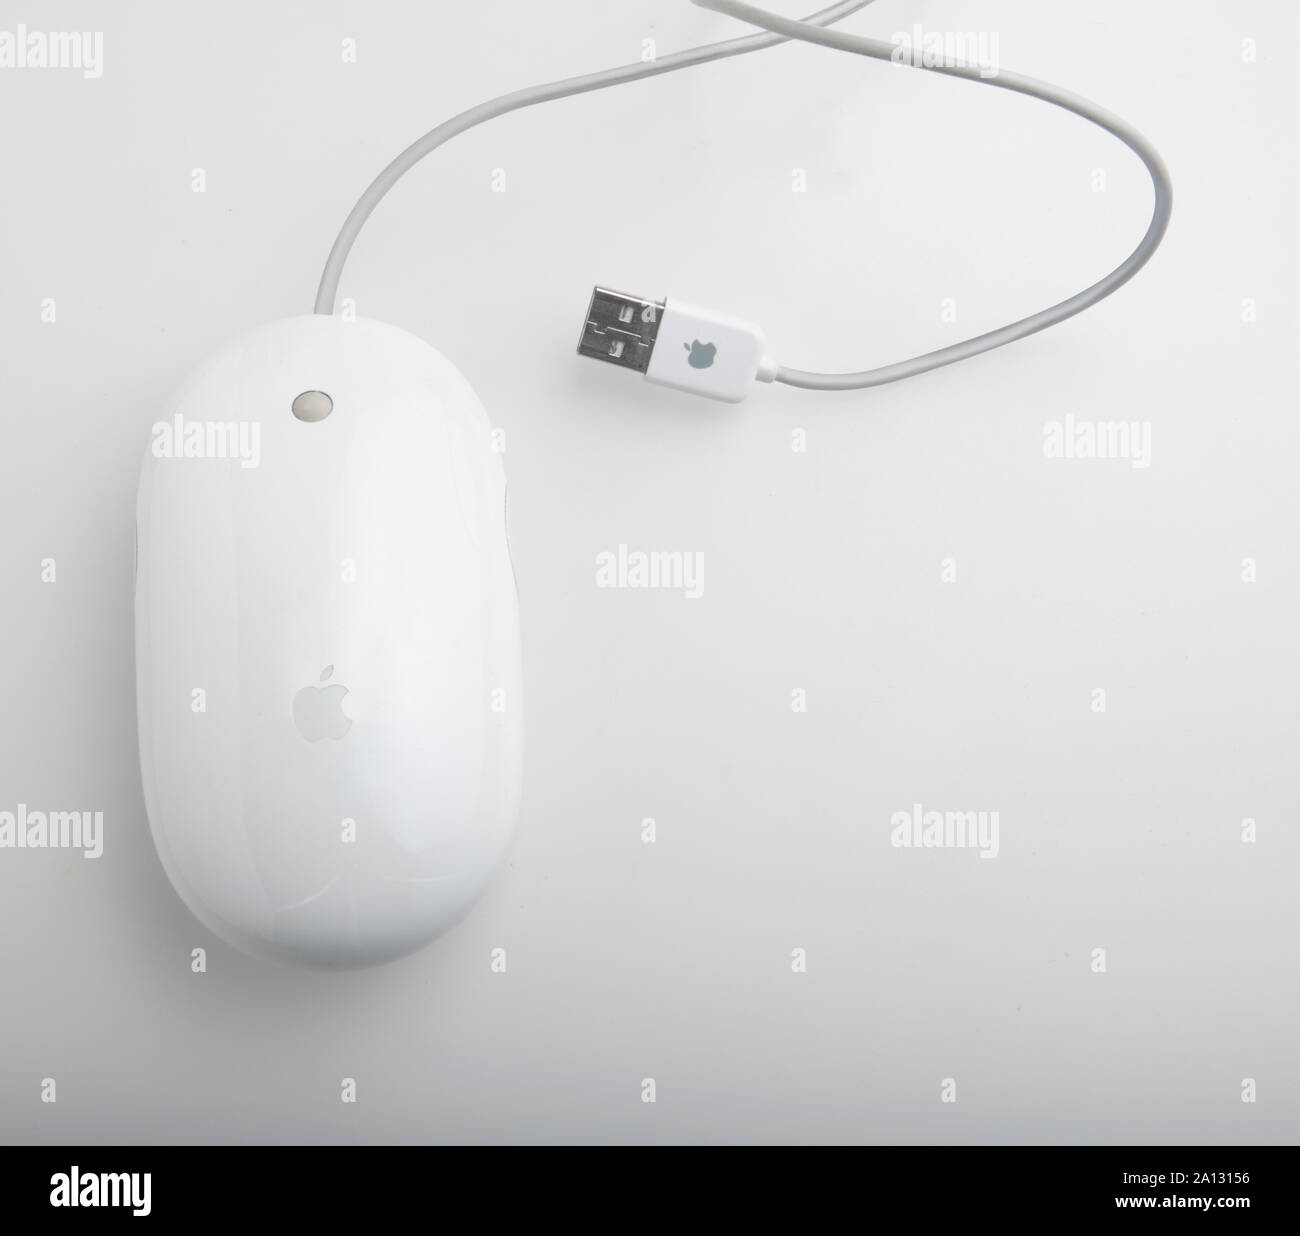 Apple Mighty Mouse Stock Photo